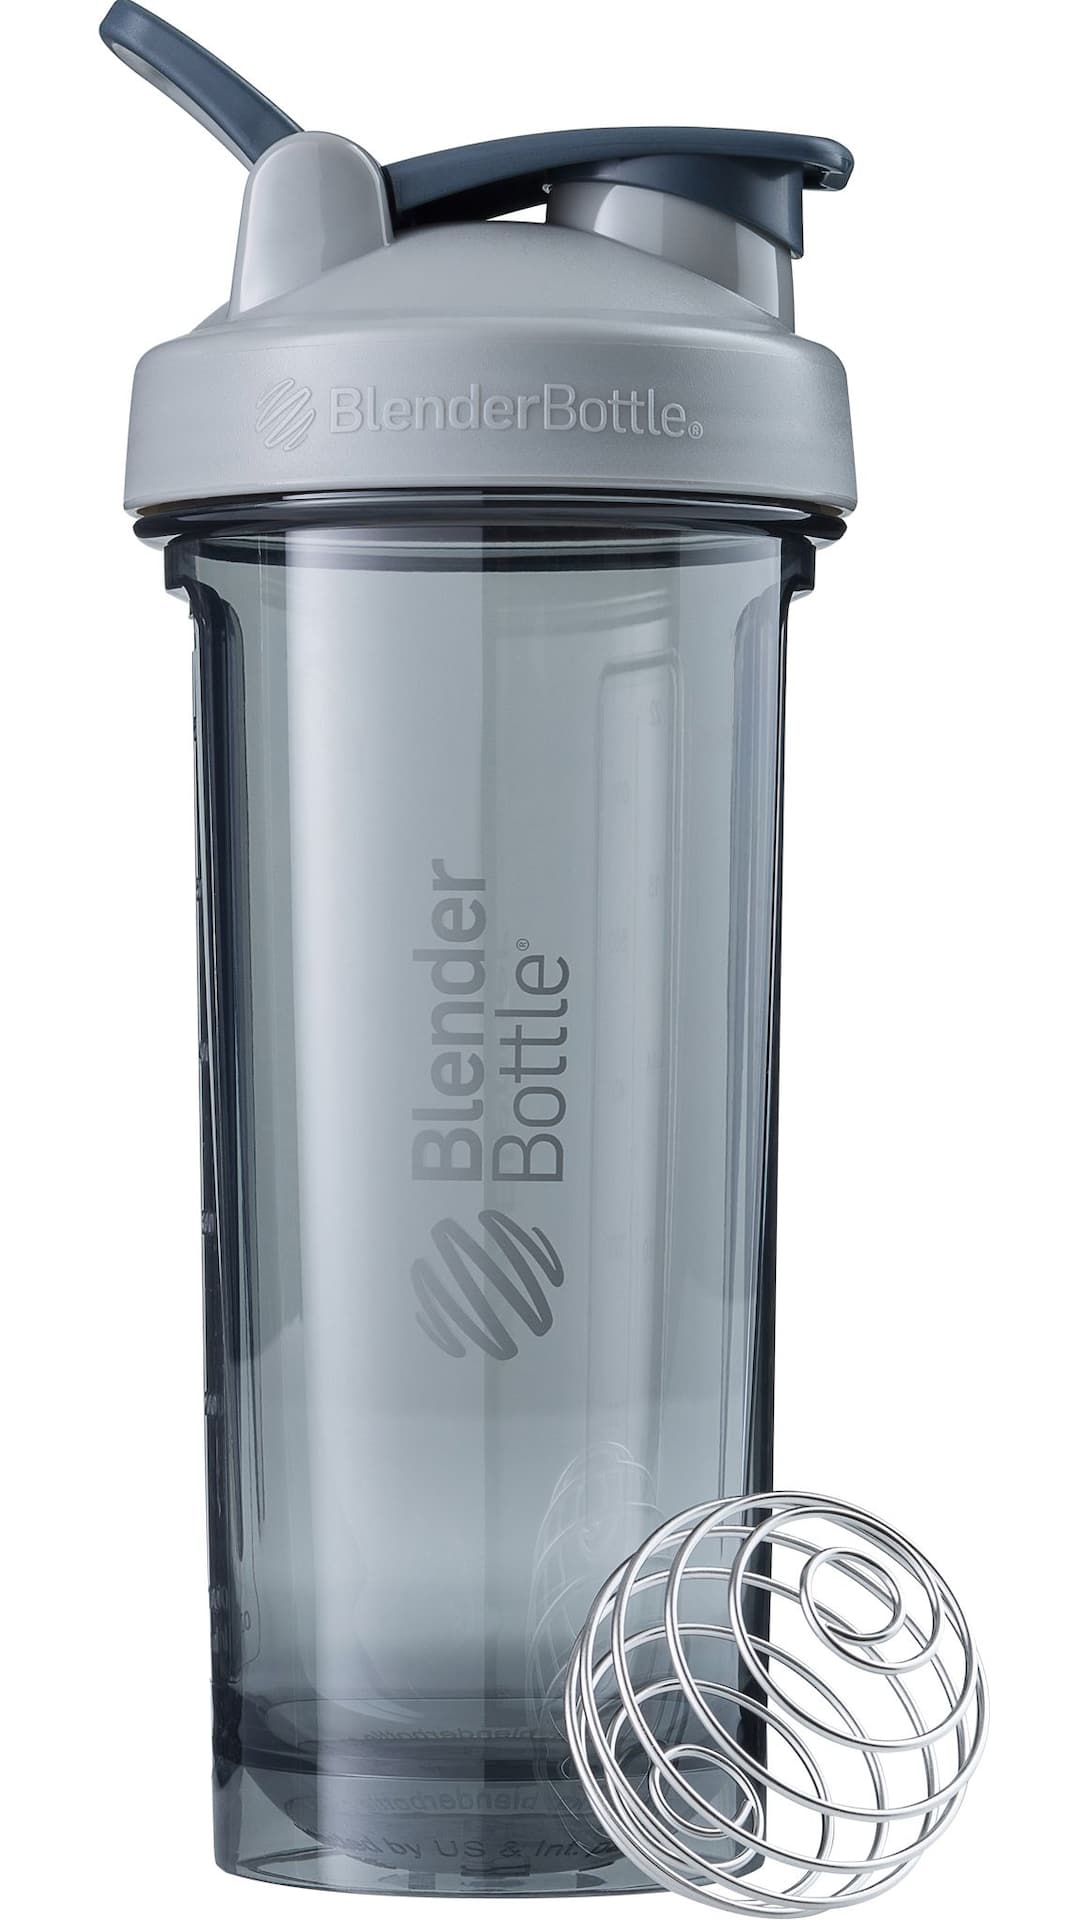 https://media-www.canadiantire.ca/product/playing/exercise/exercise-accessories/1840574/blenderbottle-pro-shaker-28oz-grey-6841b0c3-fe52-4c36-9477-363fbb491917-jpgrendition.jpg